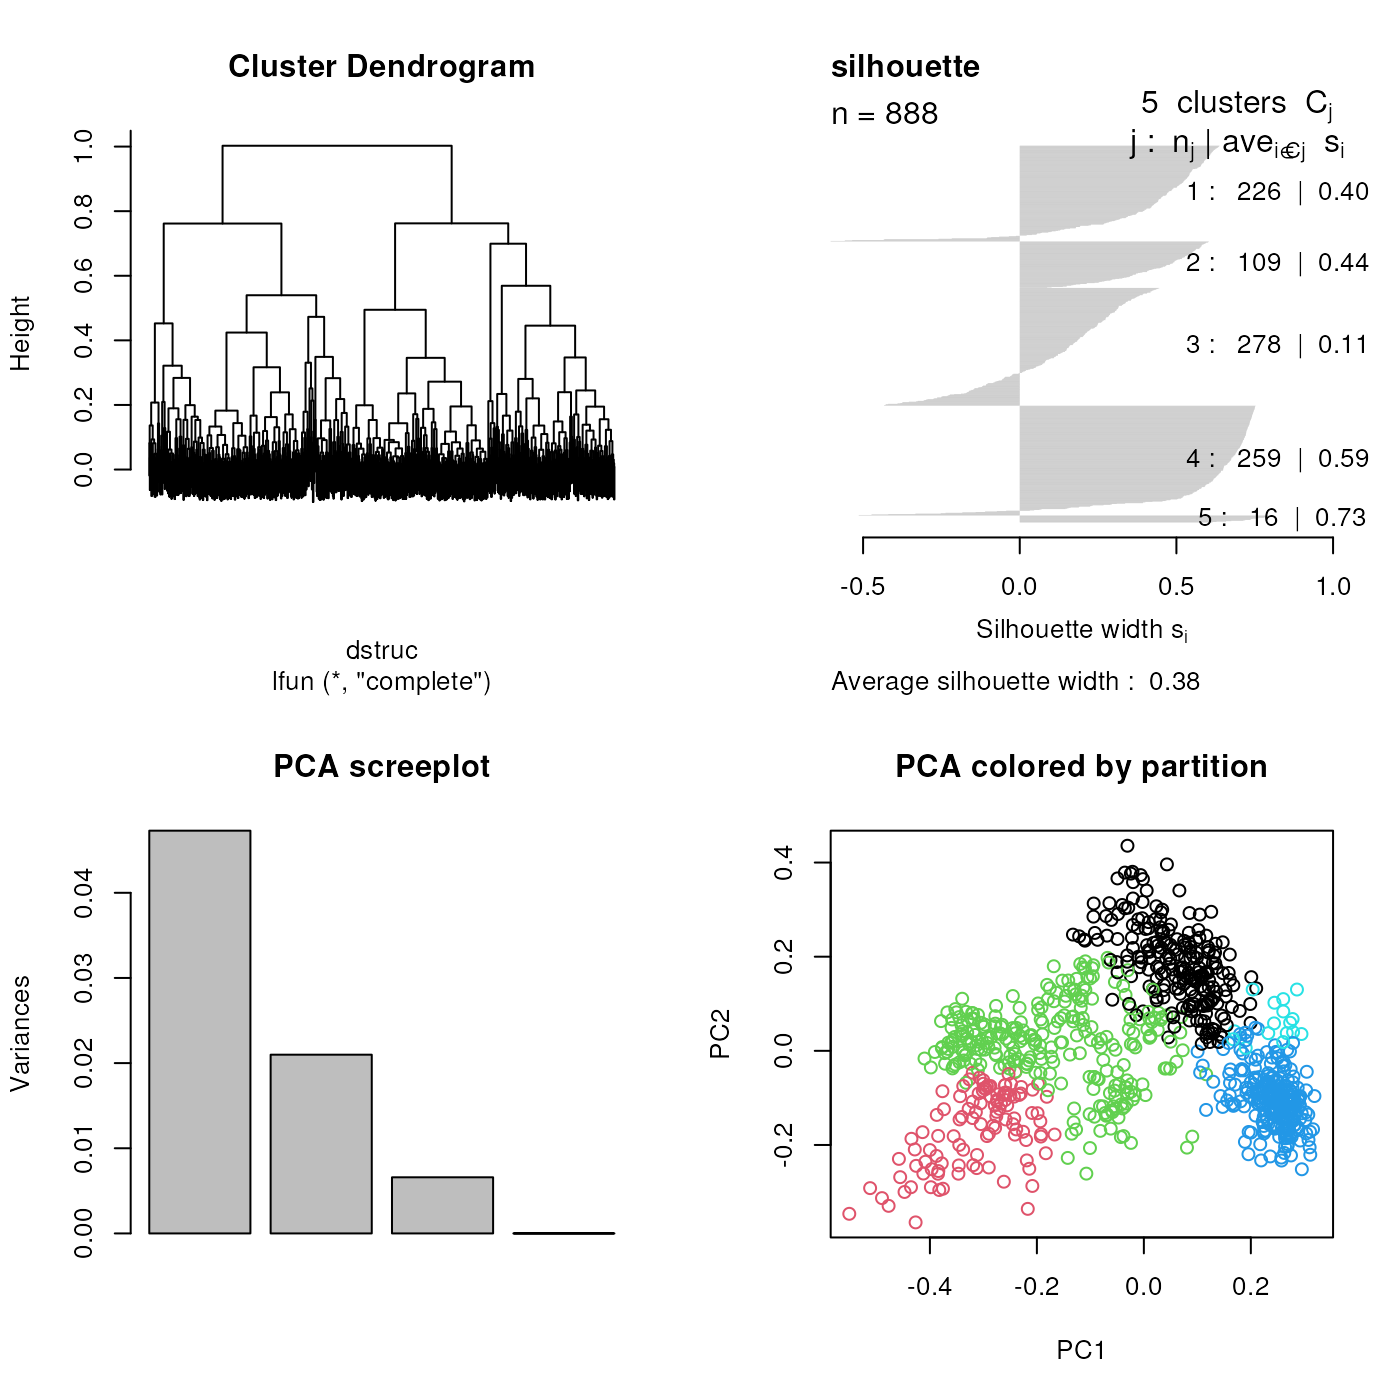 Hierarchical clustering on the `tan2009r1` data.